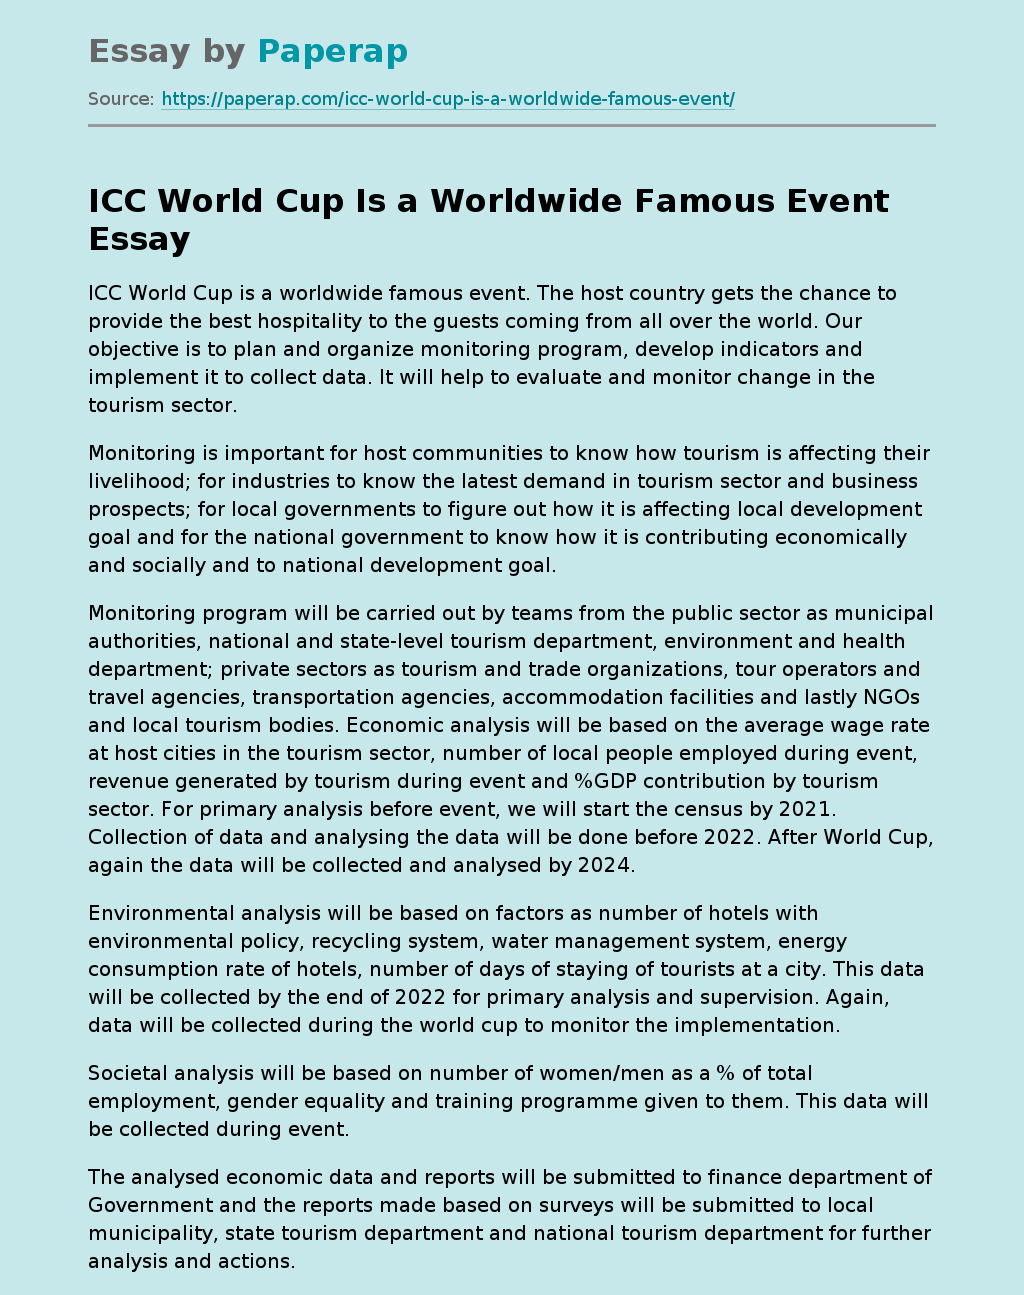 ICC World Cup Is a Worldwide Famous Event